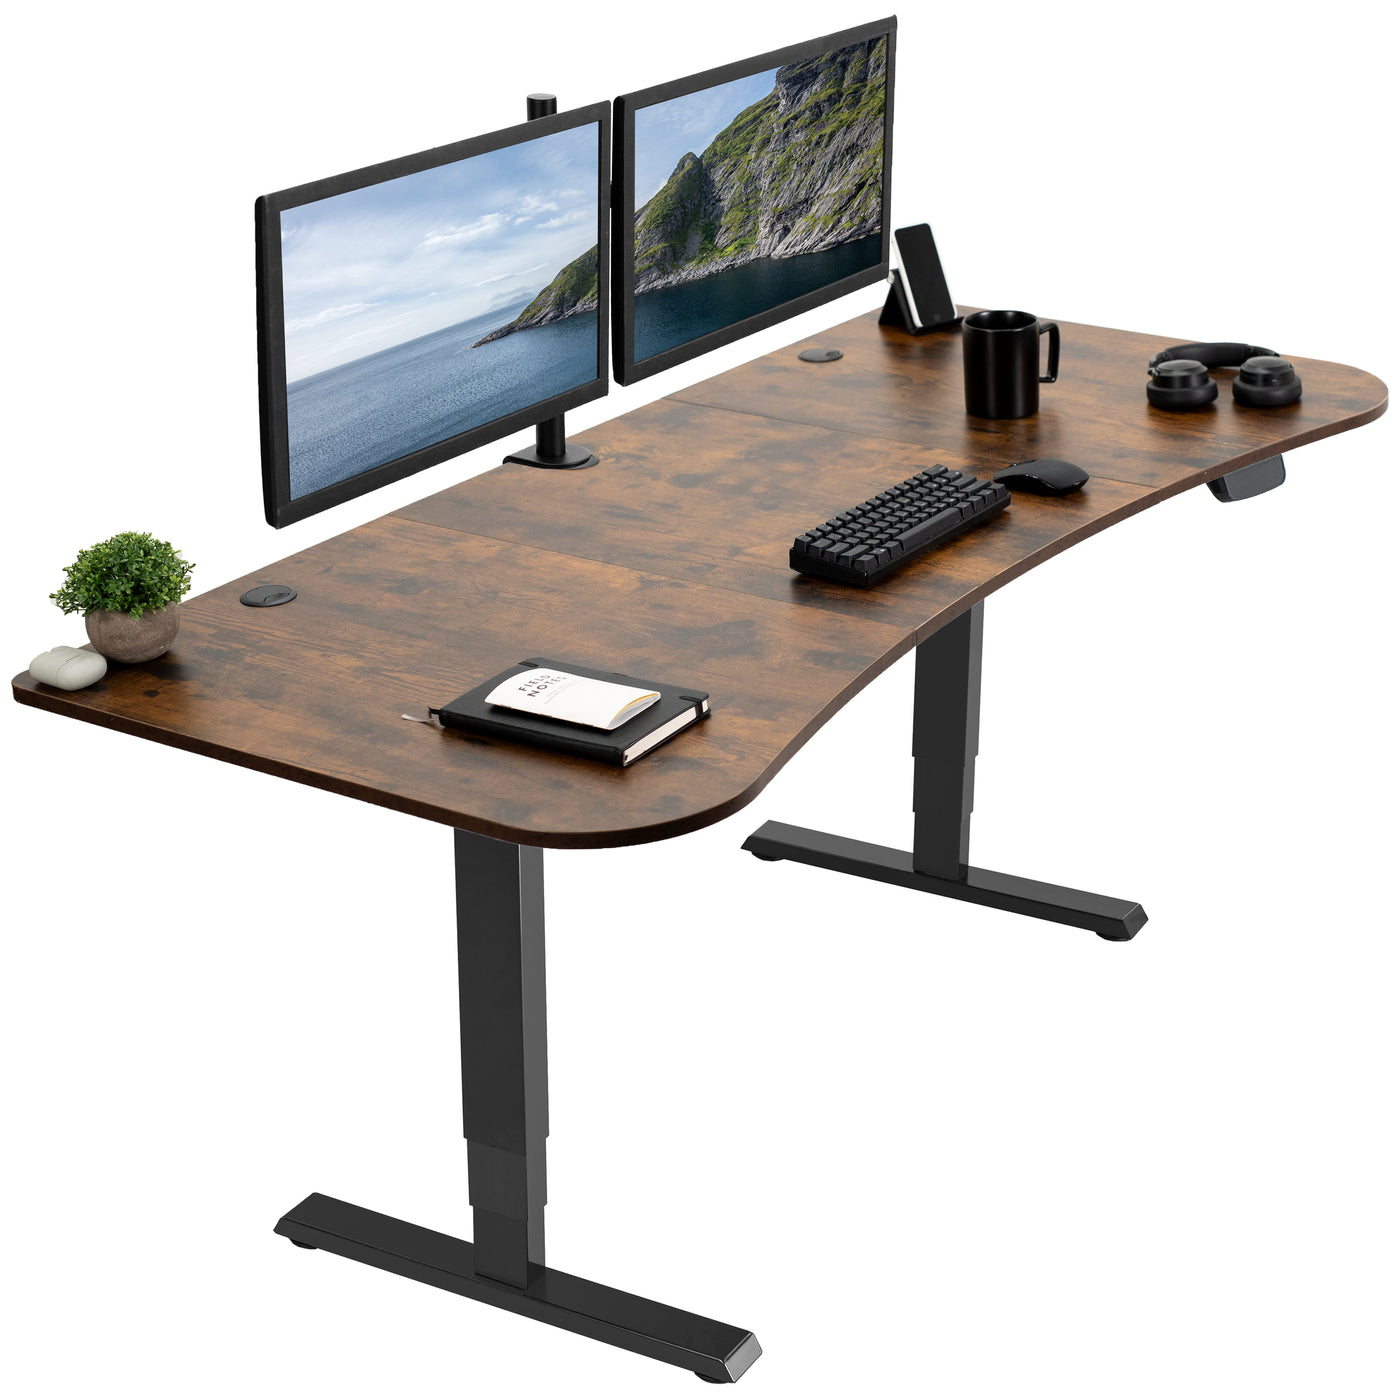 Sturdy rustic sit or stand desktop workstation with adjustable height and wide tabletop surface.